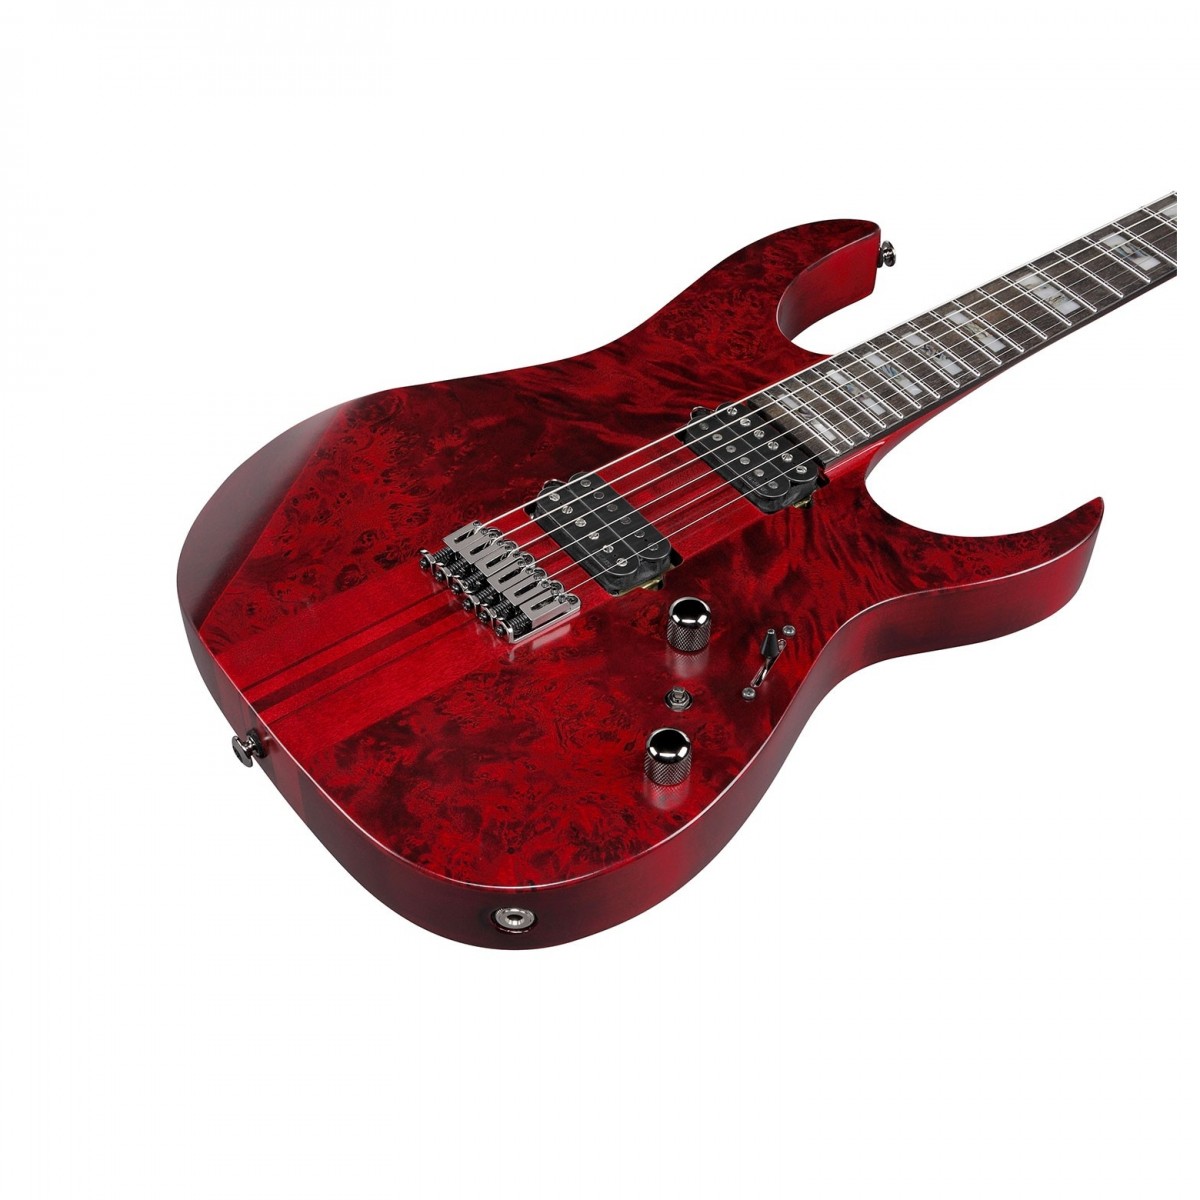 Ibanez Rgt1221pb Swl Premium 2h Dimarzio Ht Eb - Stained Wine Red Low Gloss - Str shape electric guitar - Variation 2